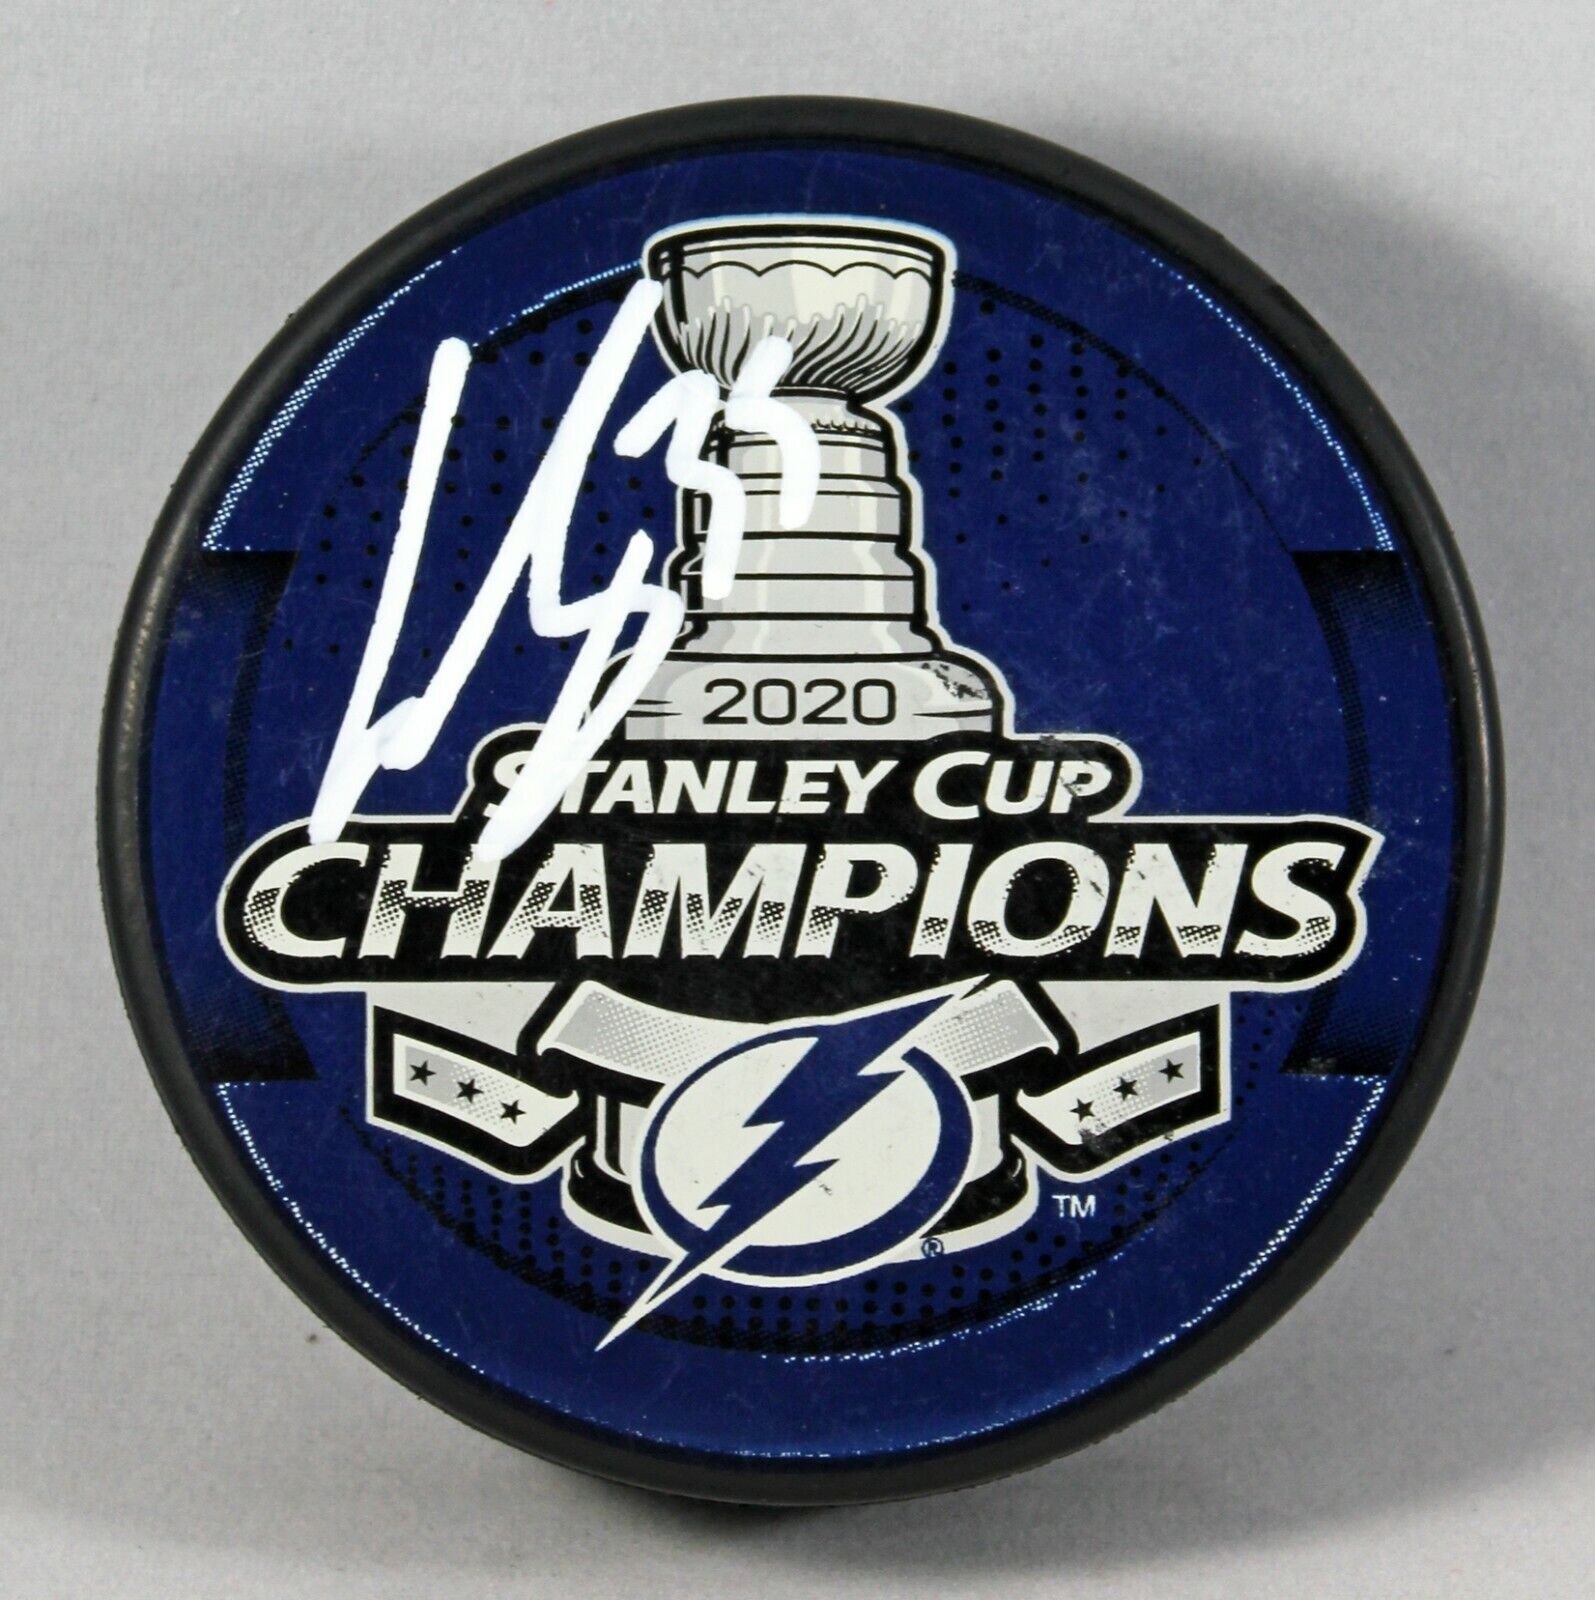 CURTIS MCELHINNEY SIGNED TAMPA BAY LIGHTNING 2020 STANLEY CUP PUCK AUTOGRAPH COA